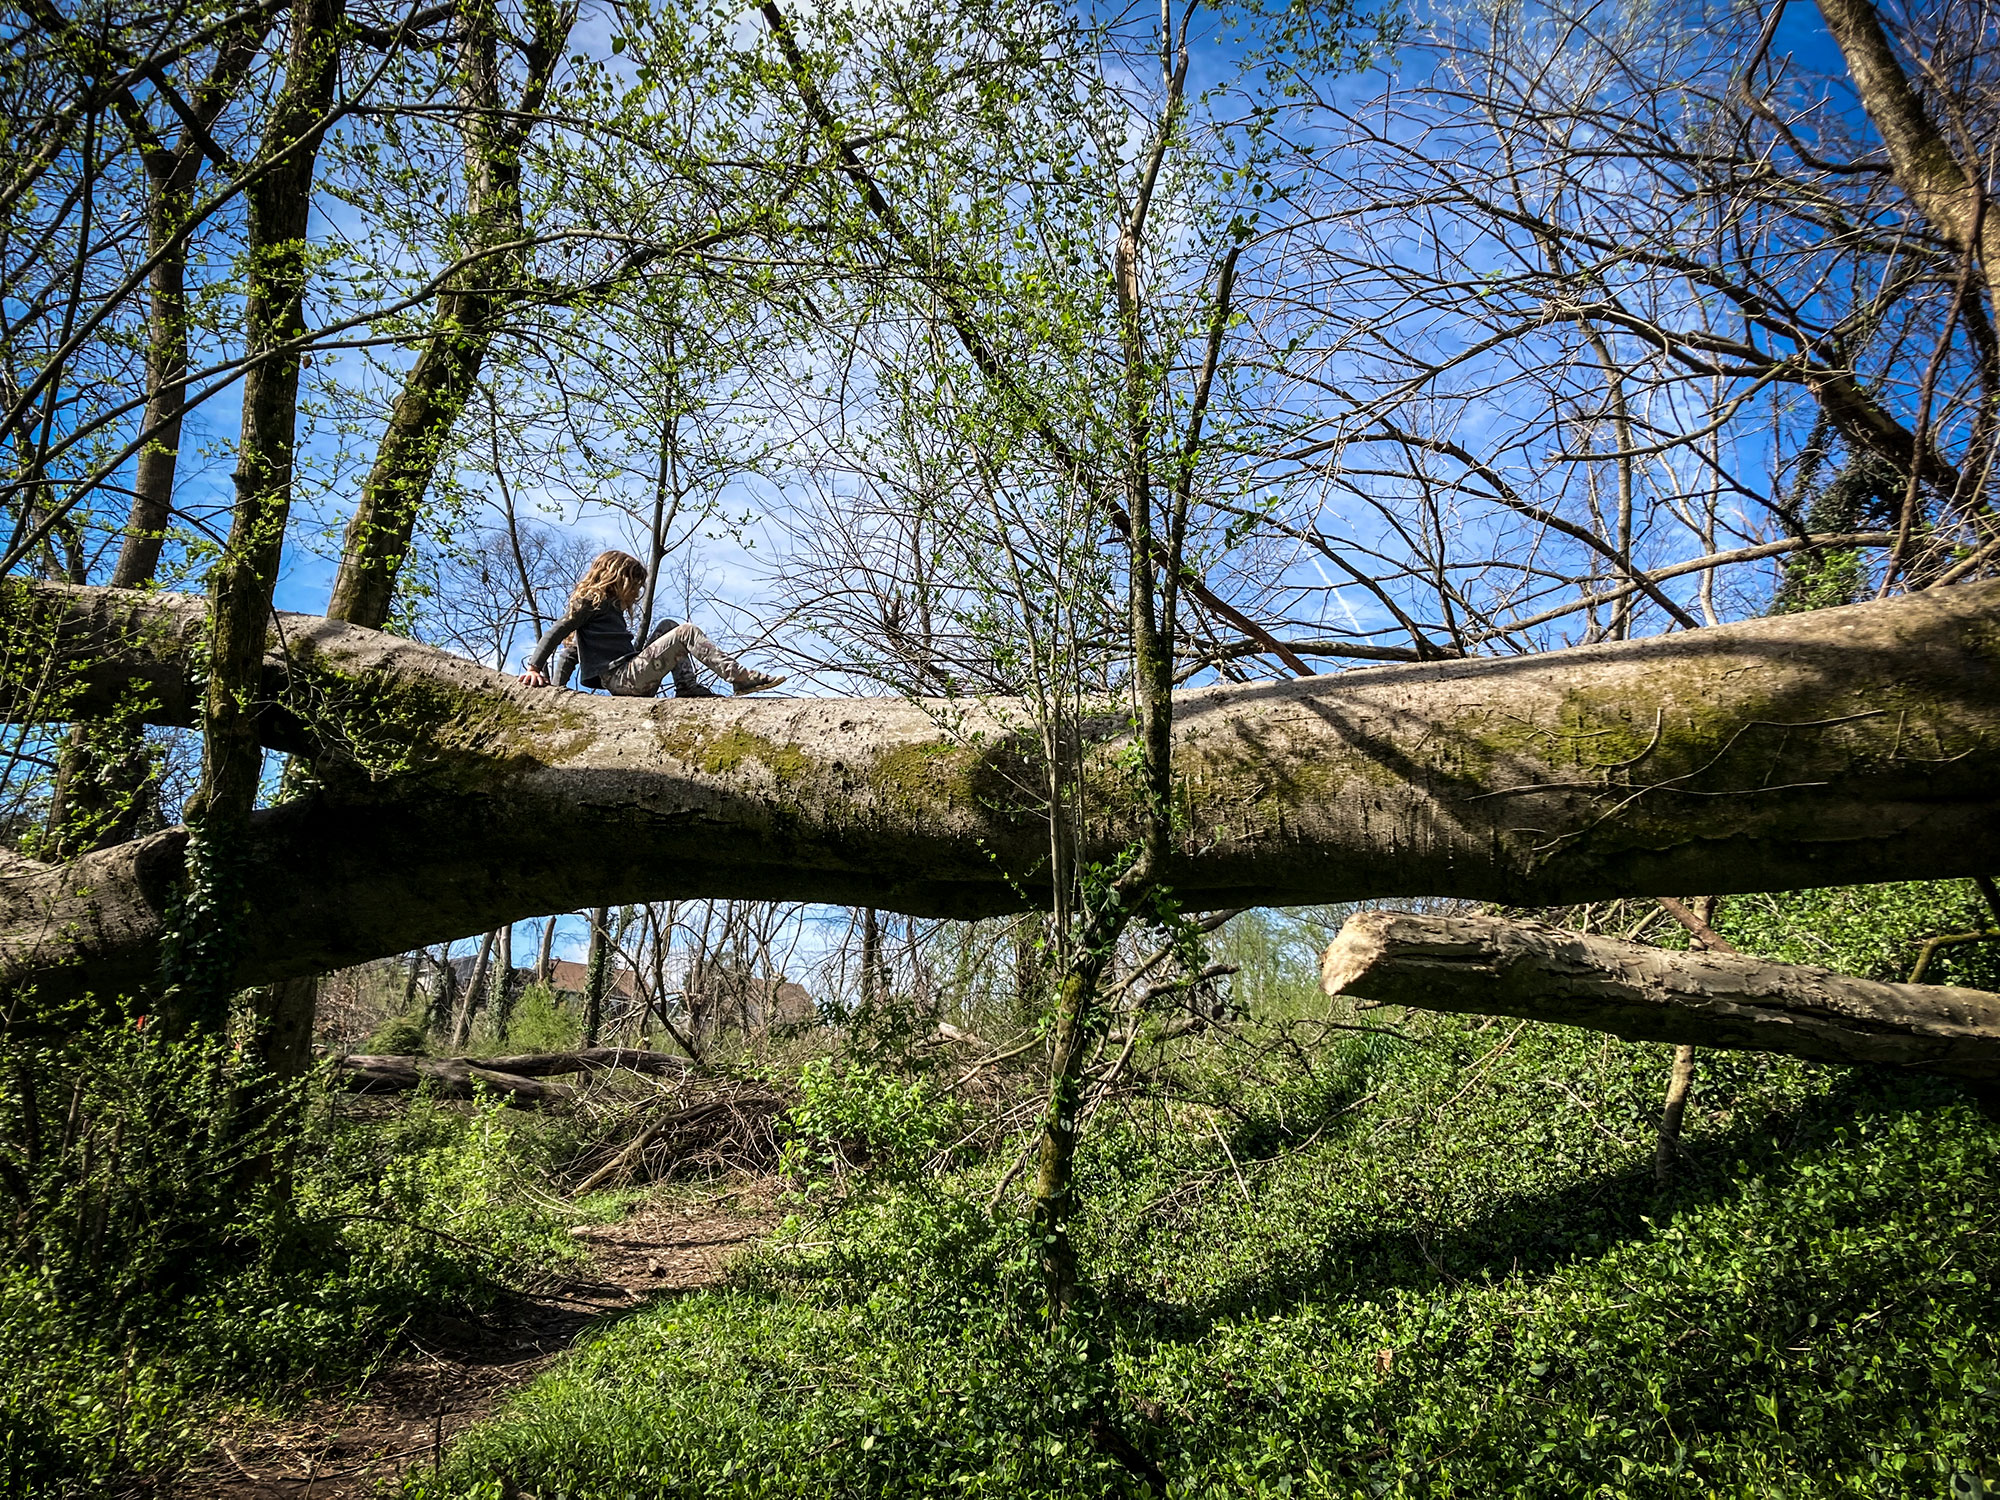 A person standing on a fallen tree in the woods.